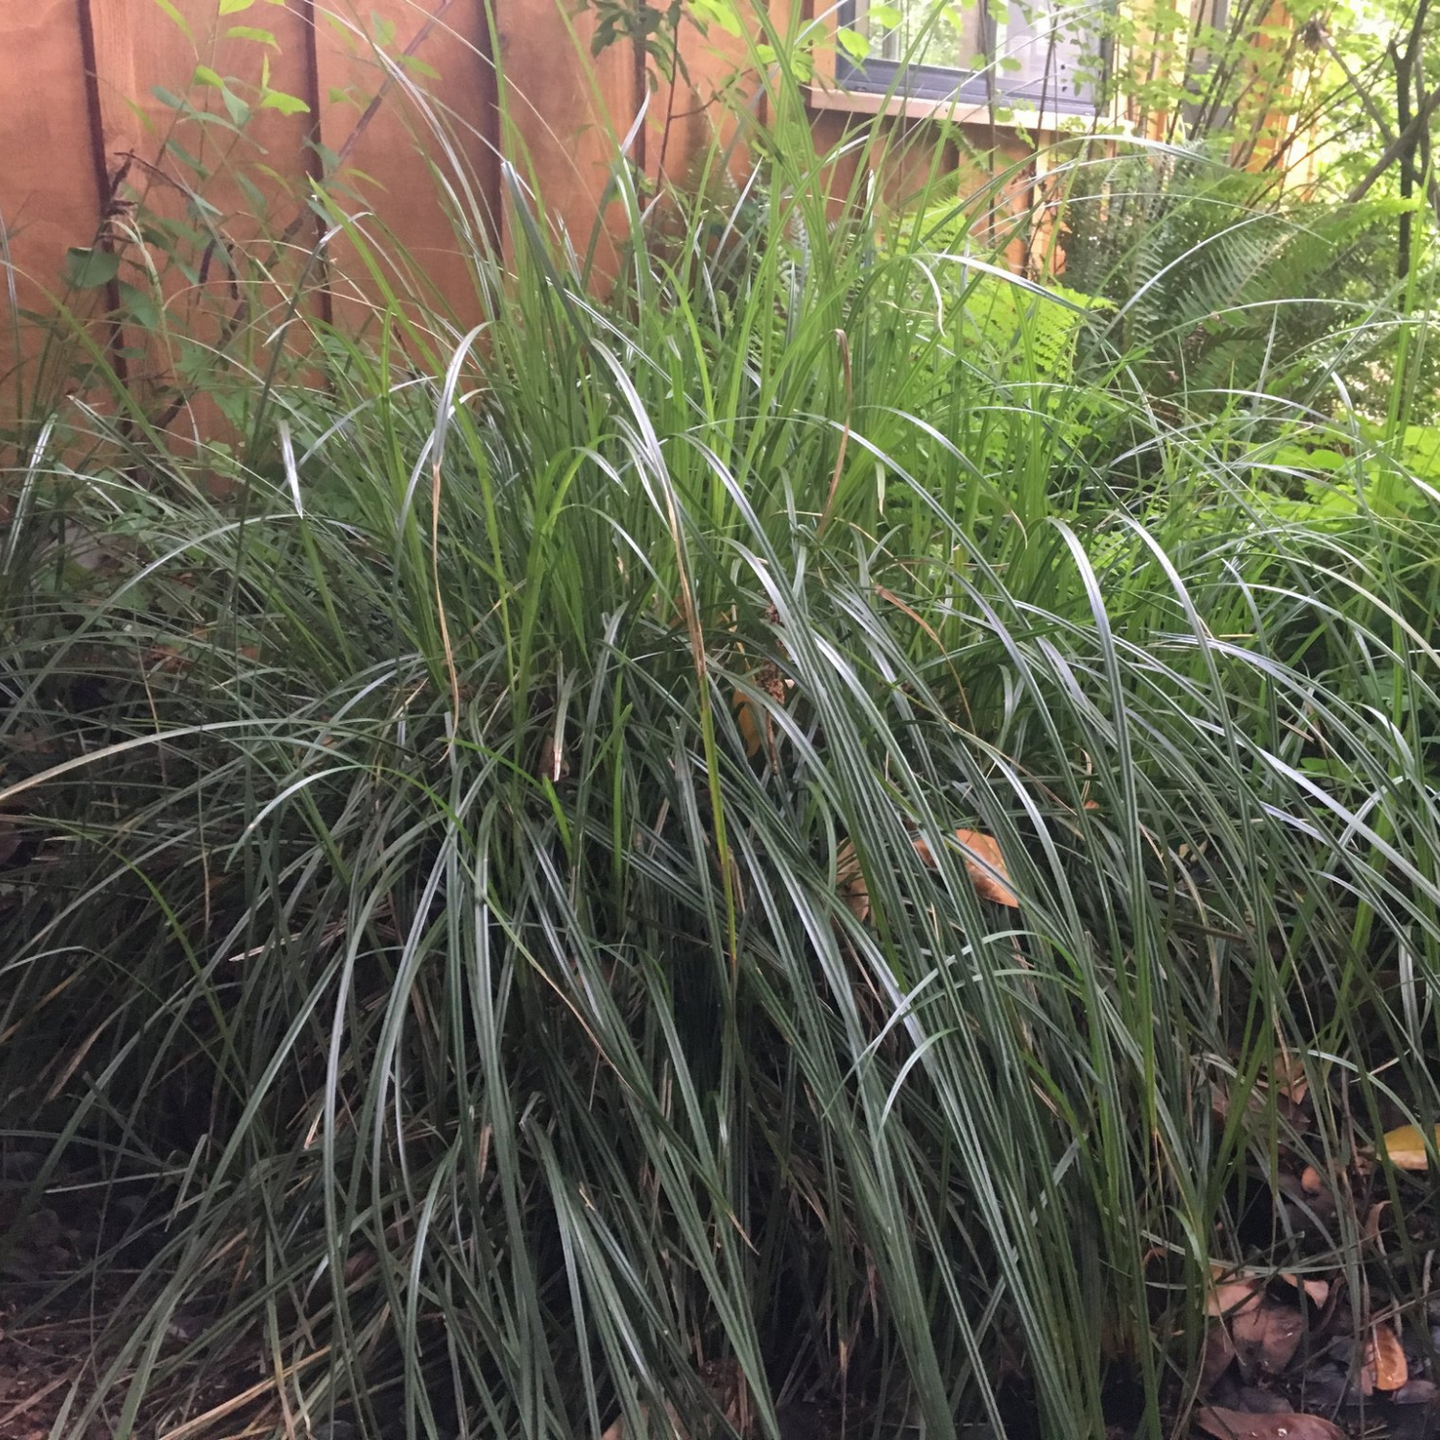 A mature slough sedge plant (Carex obnupta) creates a gorgeous evergreen backdrop in an urban raingarden. One of 150+ species of Pacific Northwest native plants available at Sparrowhawk Native Plants, Native Plant Nursery in Portland, Oregon.